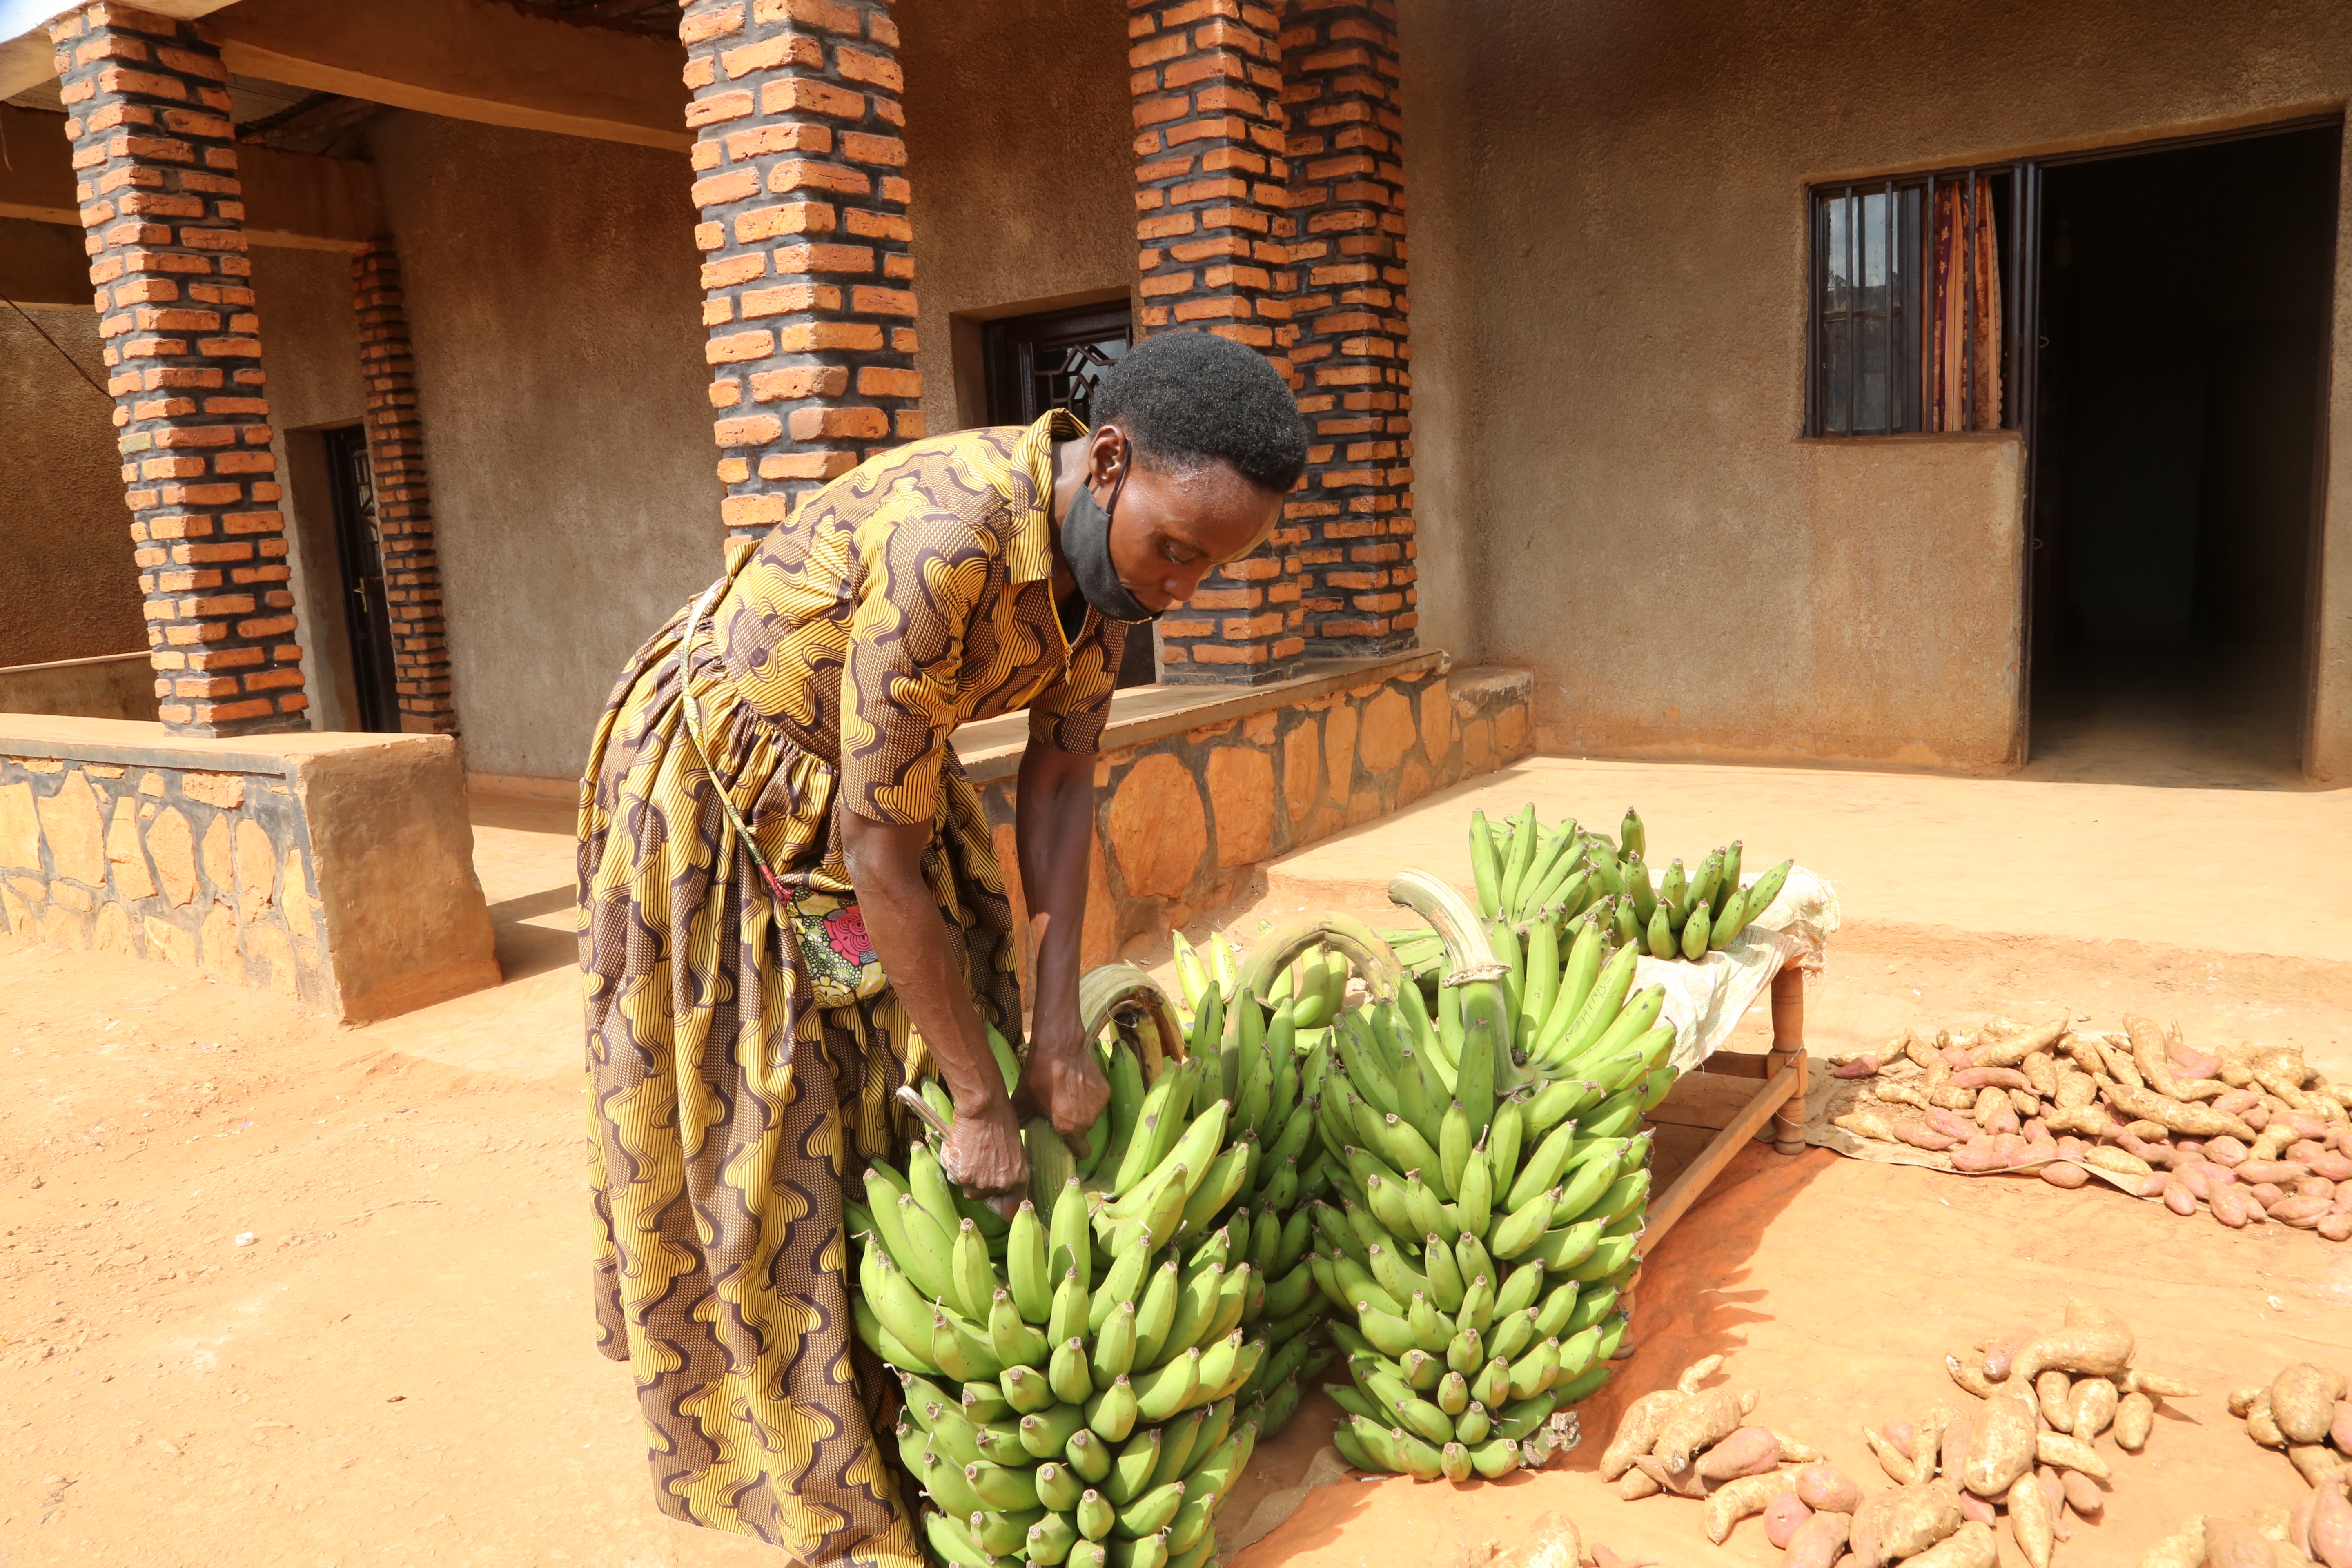 Immaculee prepares bananas for an order received from a customer